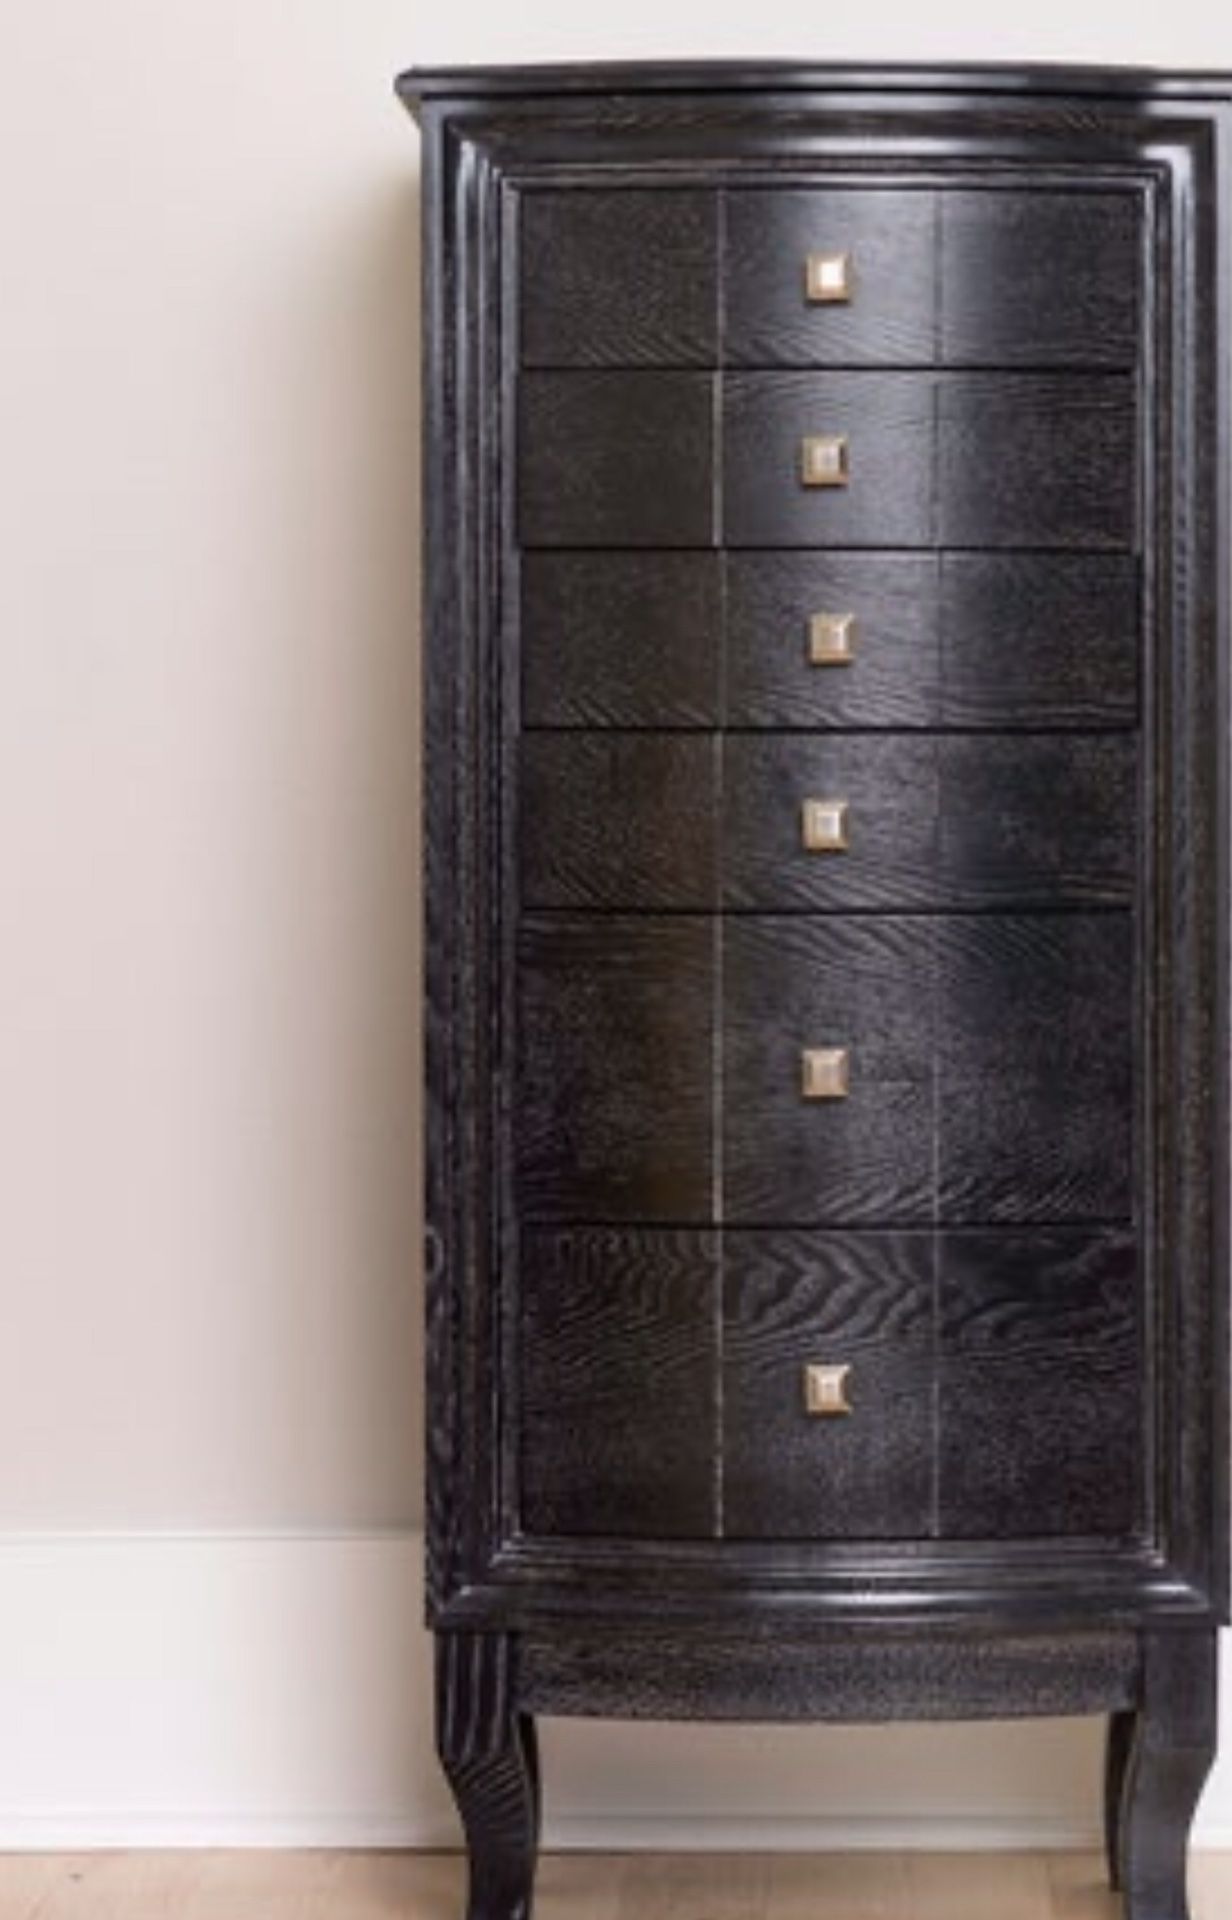 New!! Armoire, cabinet, 2 side door 6 drawer jewelry cabinet, jewelry armoire, storage unit, organizer, bedroom furniture